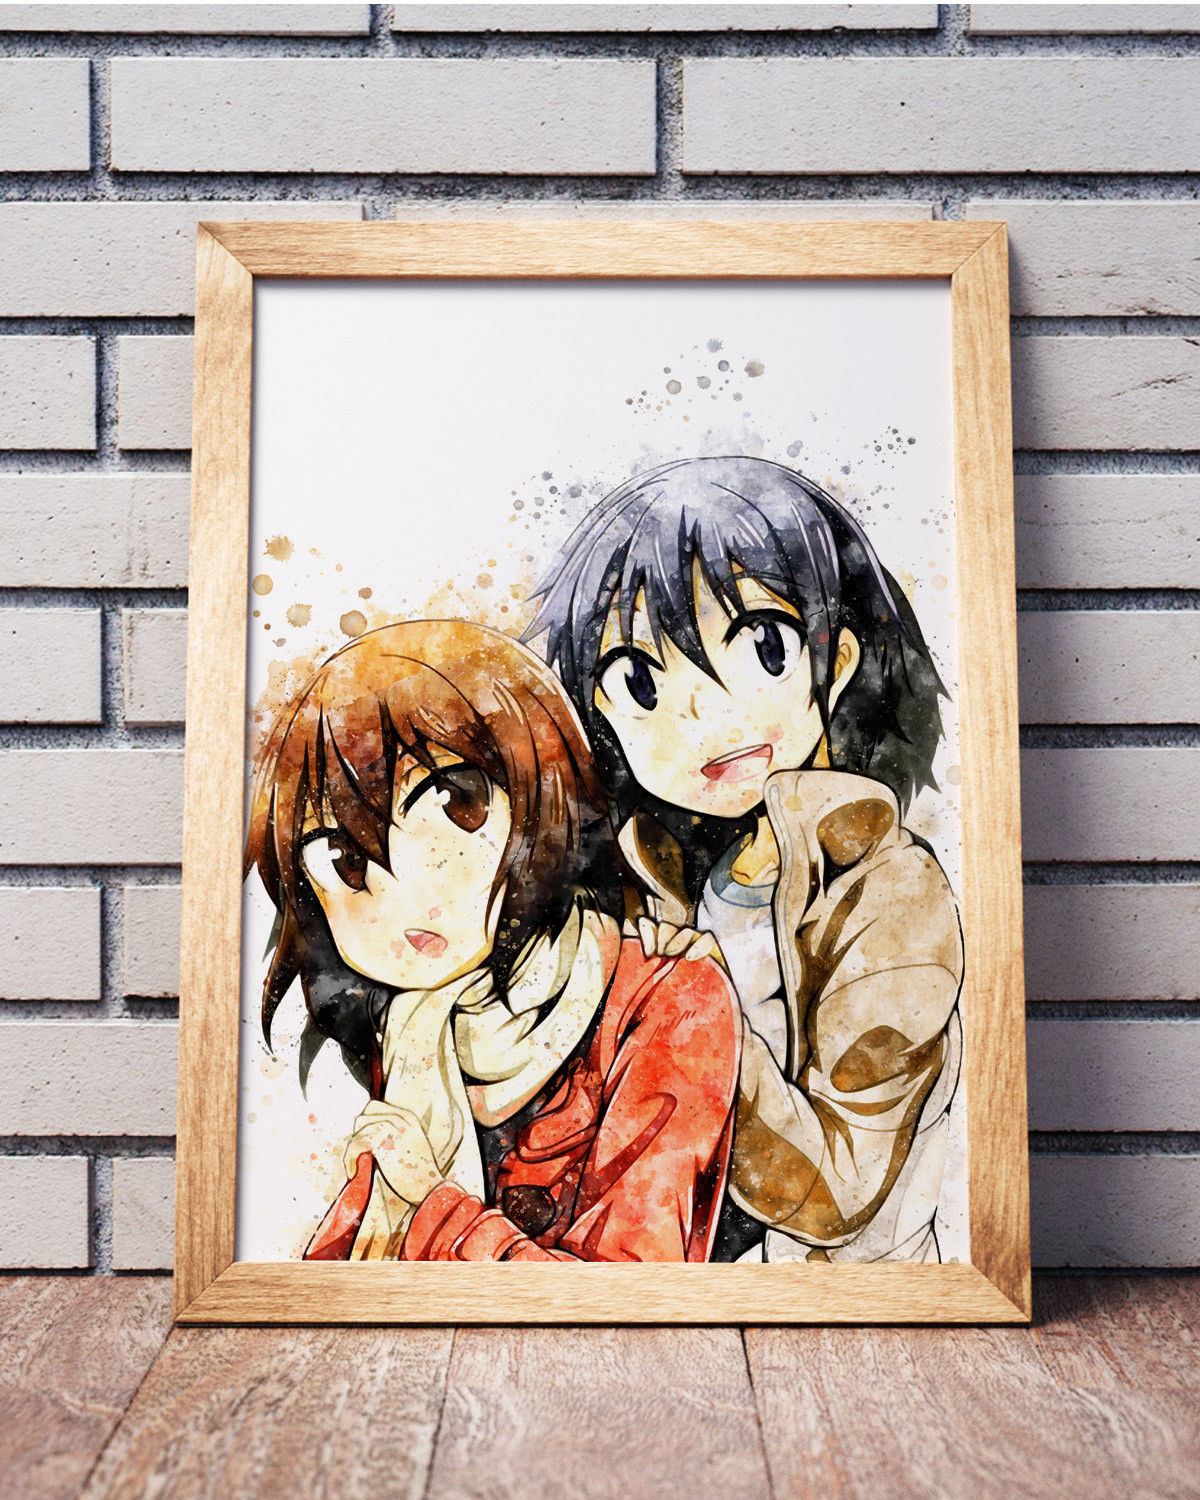 Anime Prints For Wall Free - 7085 7062 1 other anime colorful anime